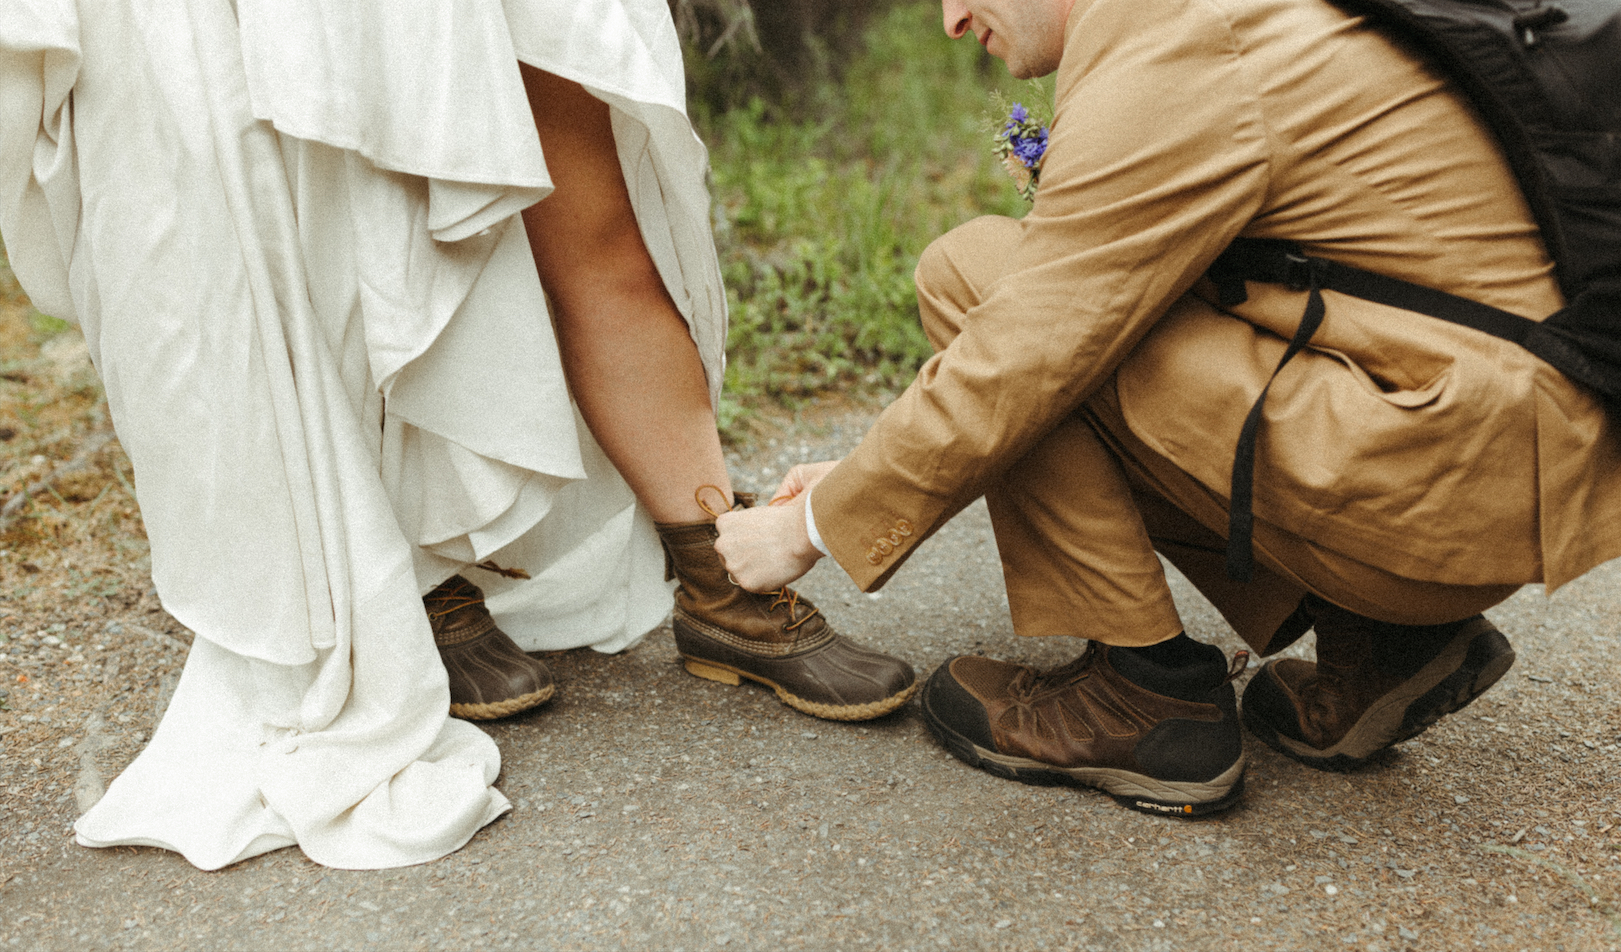 Groom tying brides shoes during an elopement in Alaska